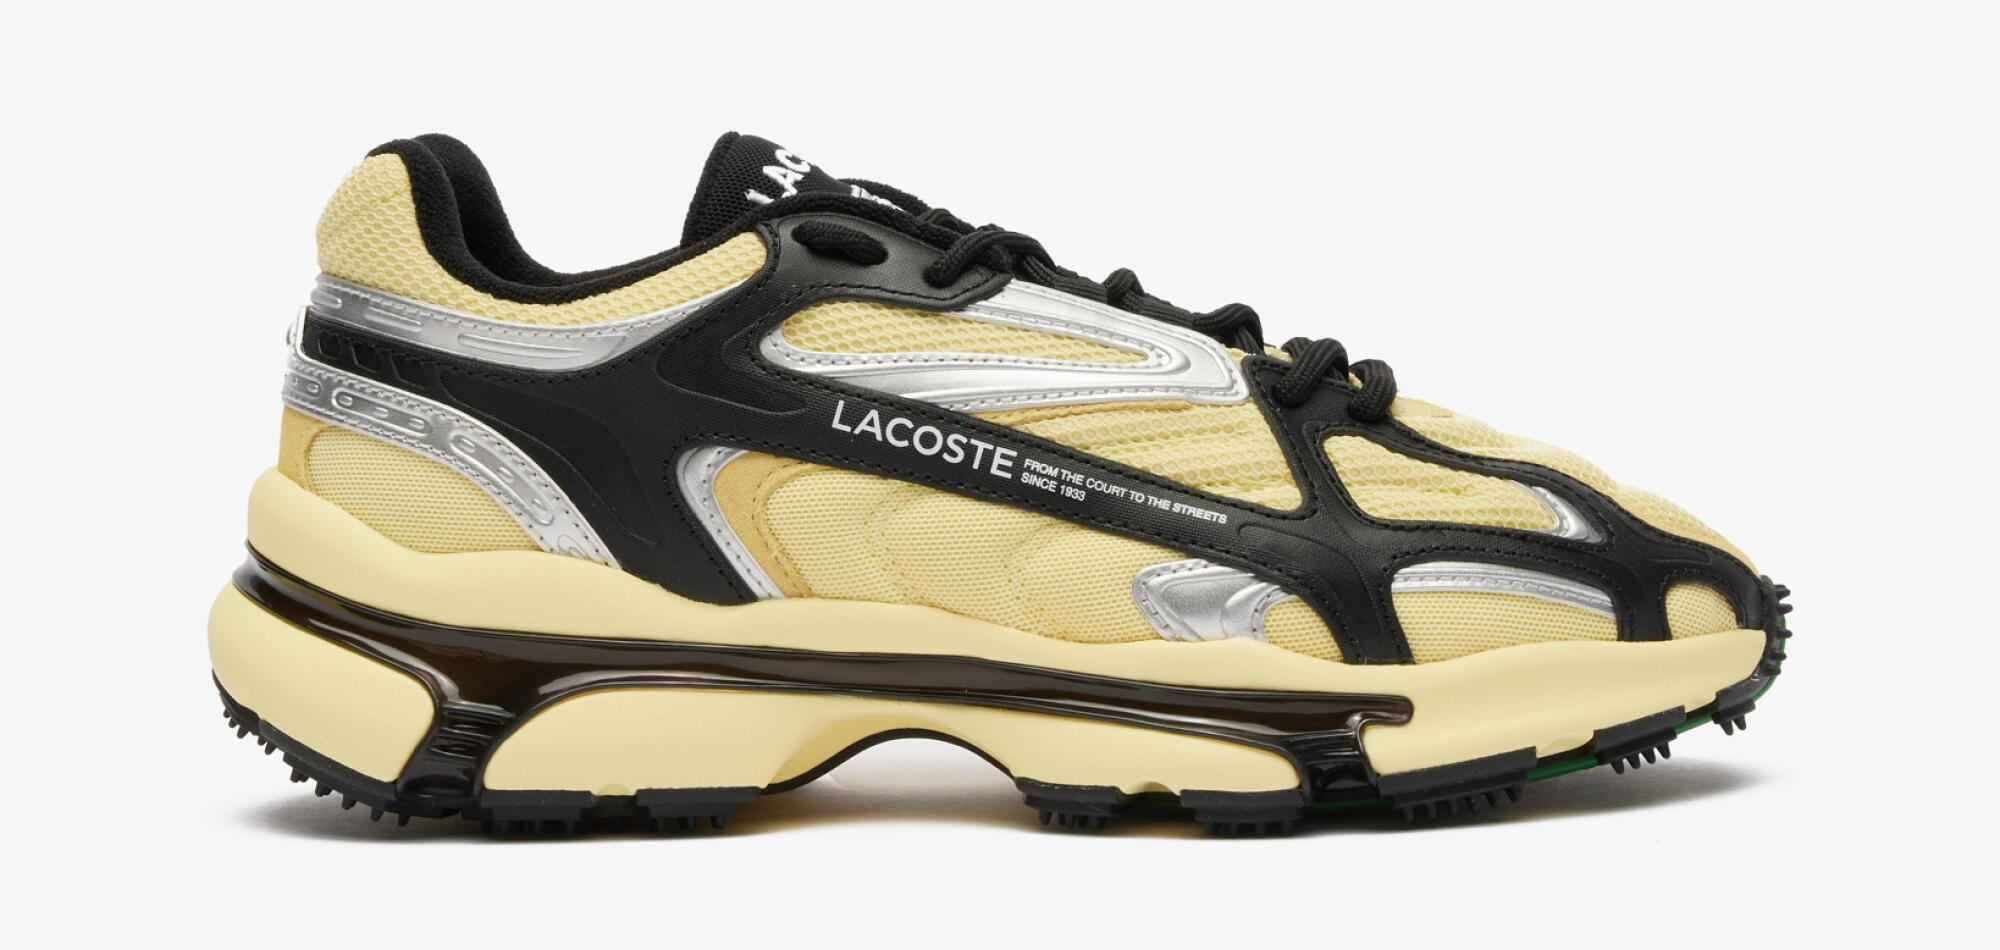 A Lacoste sneakers in a butter yellow color.